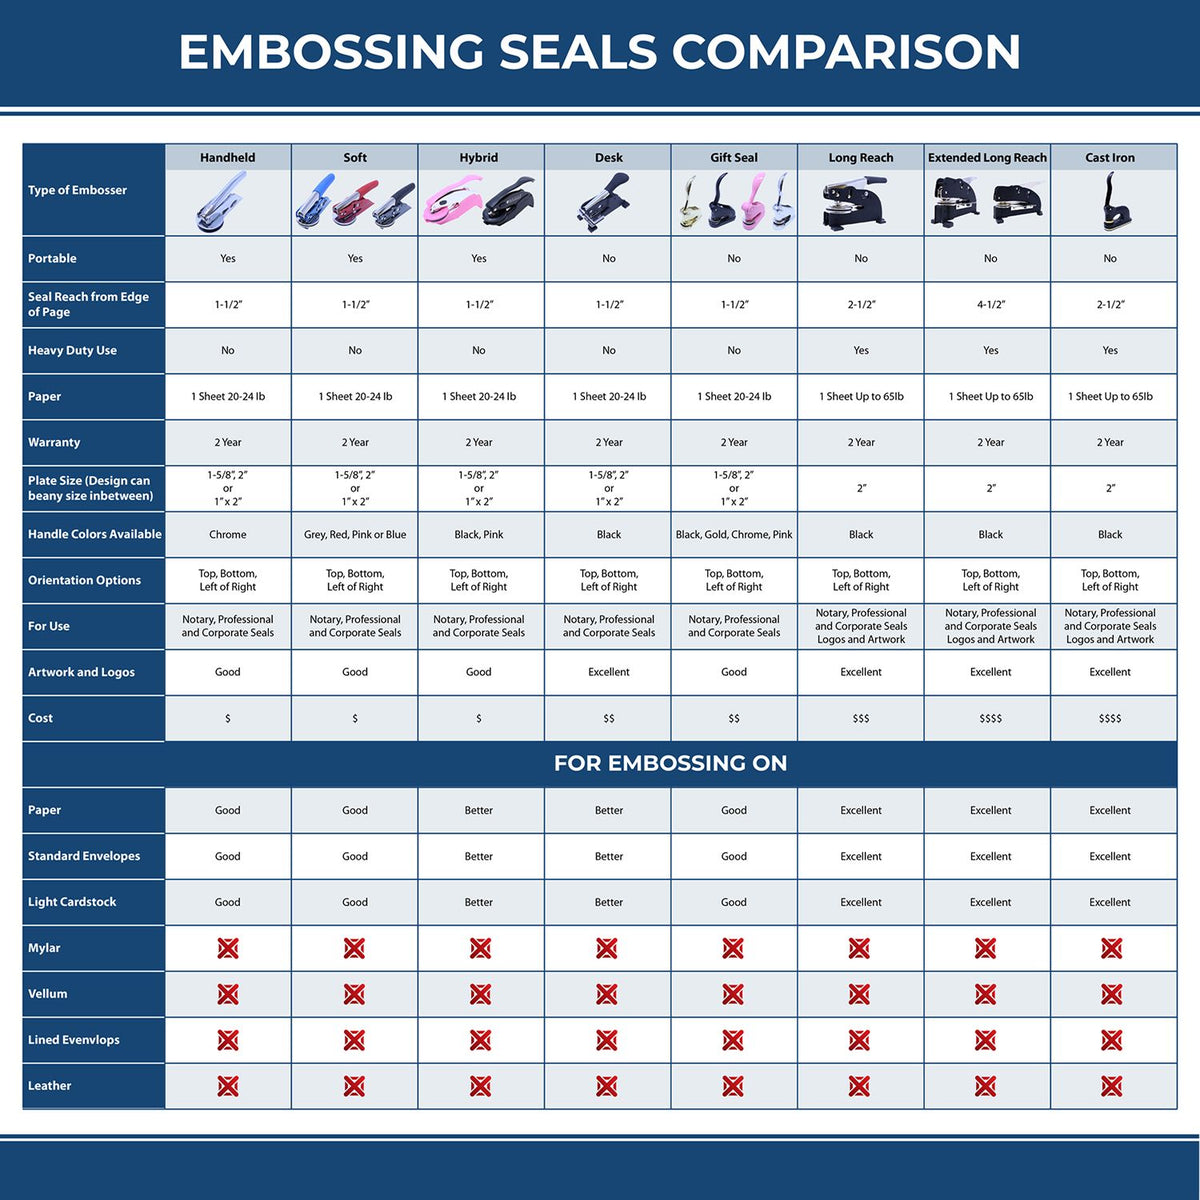 A comparison chart for the different types of mount models available for the Soft Pocket North Carolina Landscape Architect Embosser.